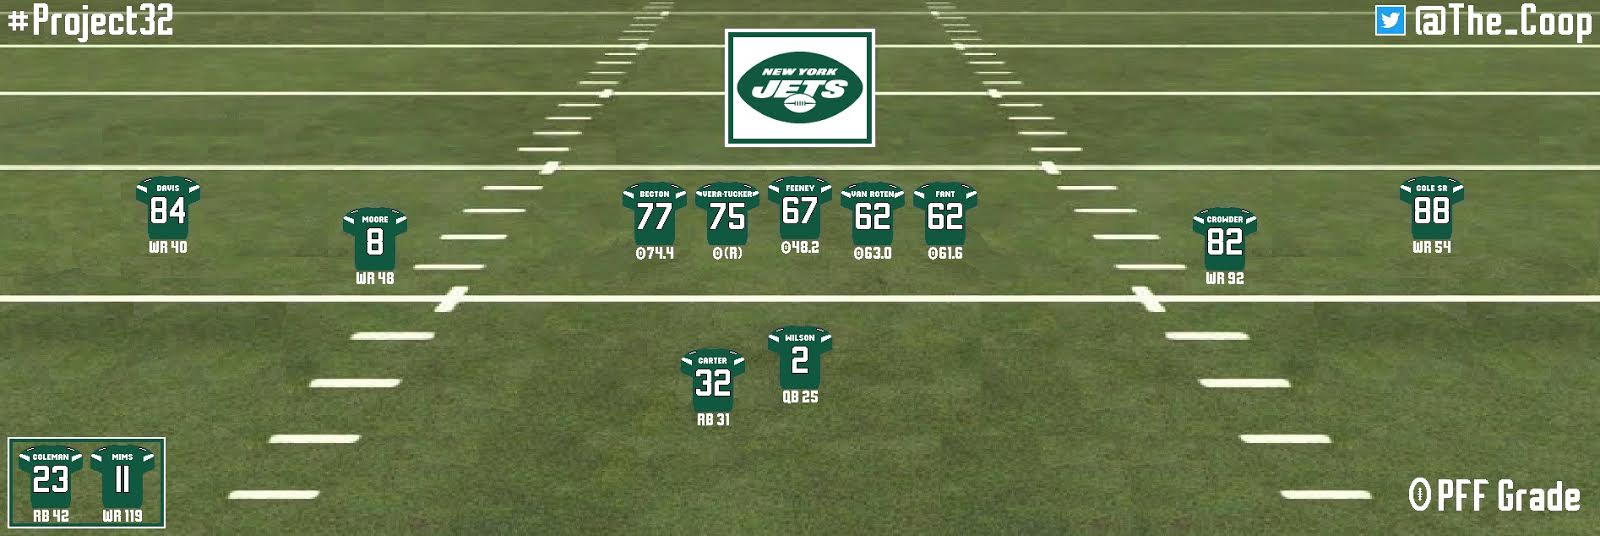 New York Jets 2021 projections